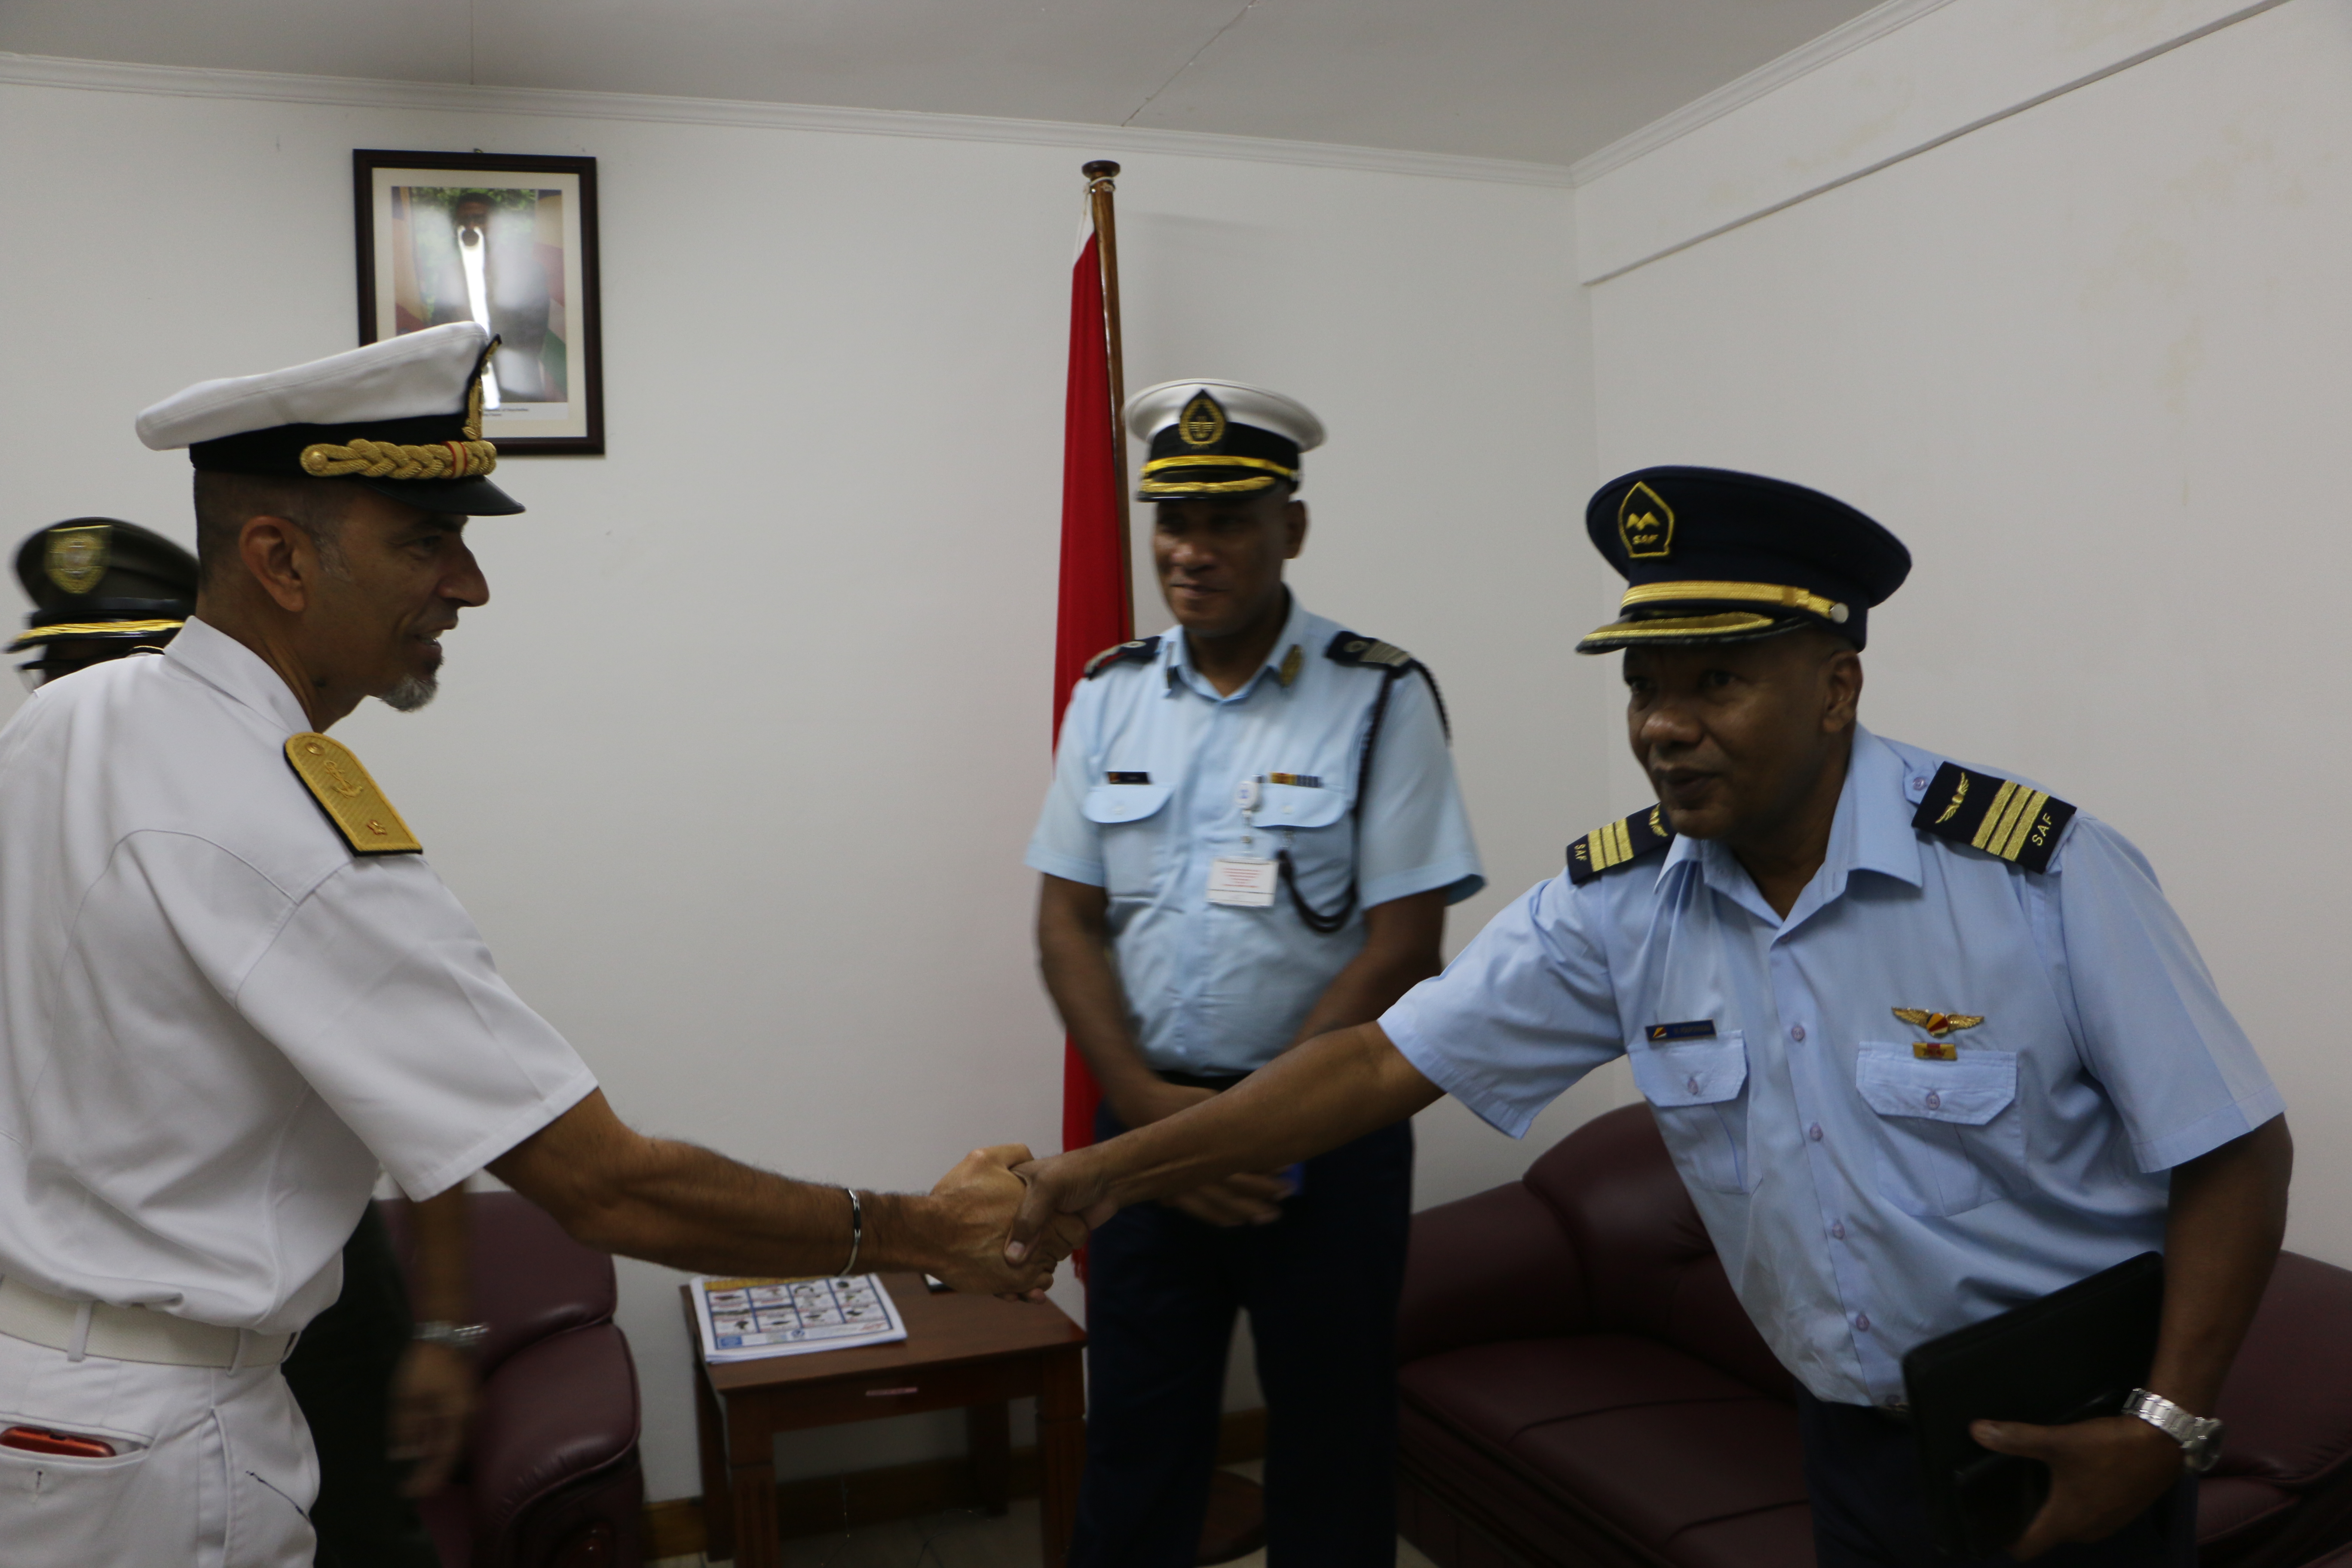 R. Adm. Simi with the Seychelles Air Force Commander.